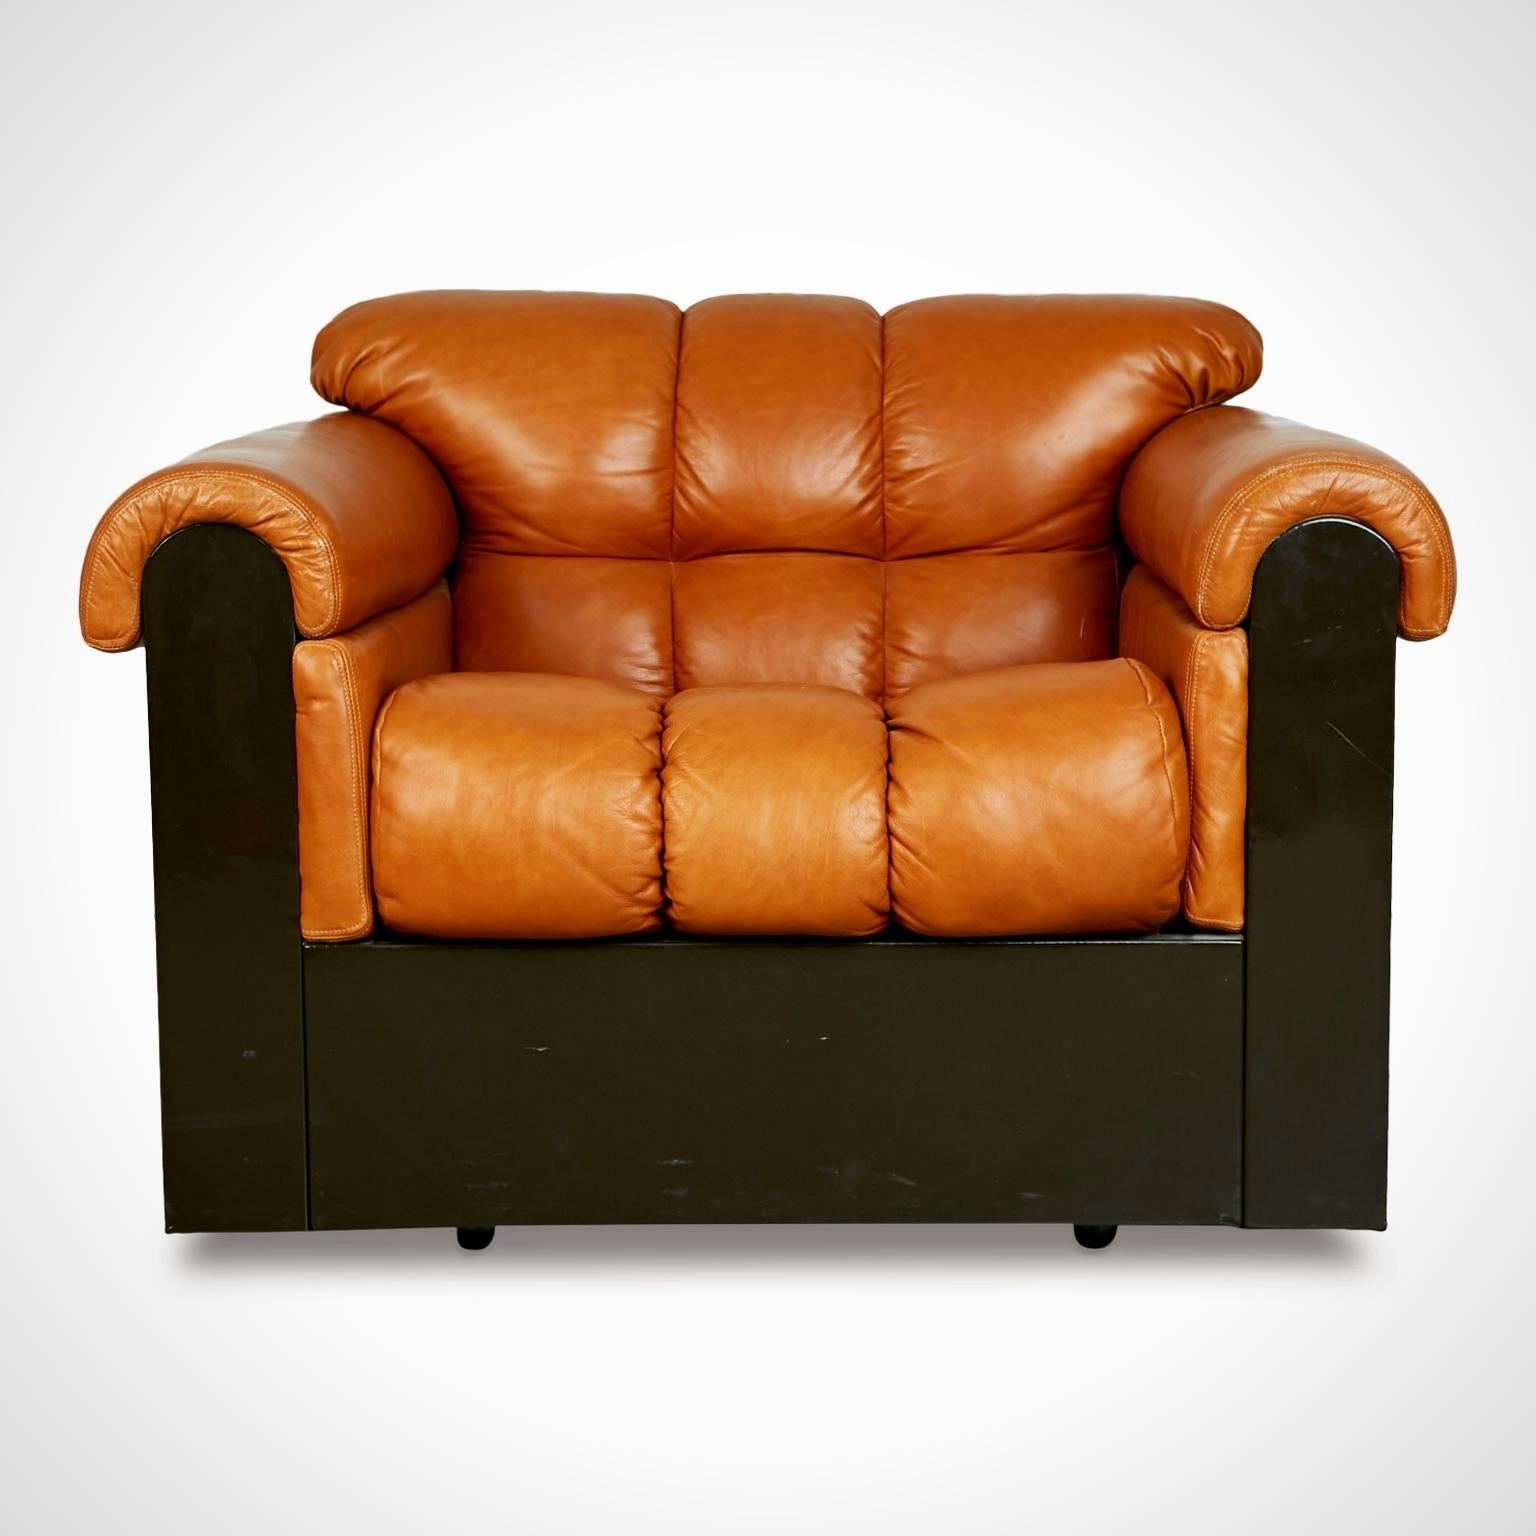 Modern Tufted Leather Lounge Chairs by Davanzati for i4 Mariani Pace, Pair 